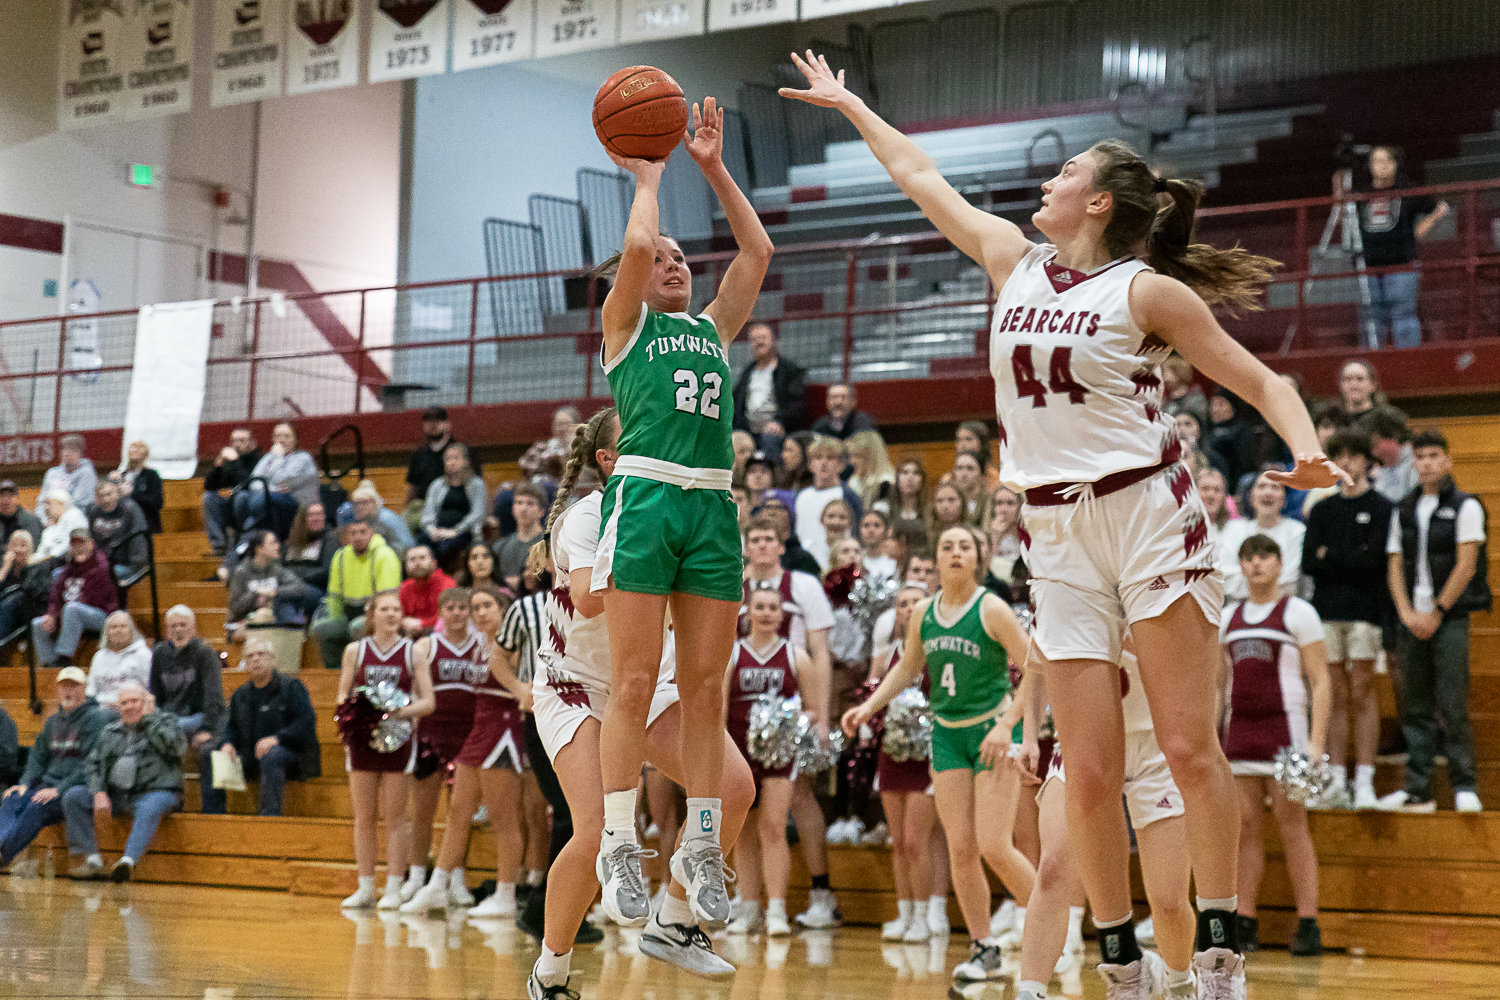 Tumwater guard Regan Brewer rises for a last-second shot at the end of the half against W.F. West's Julia Dalan Jan. 26.